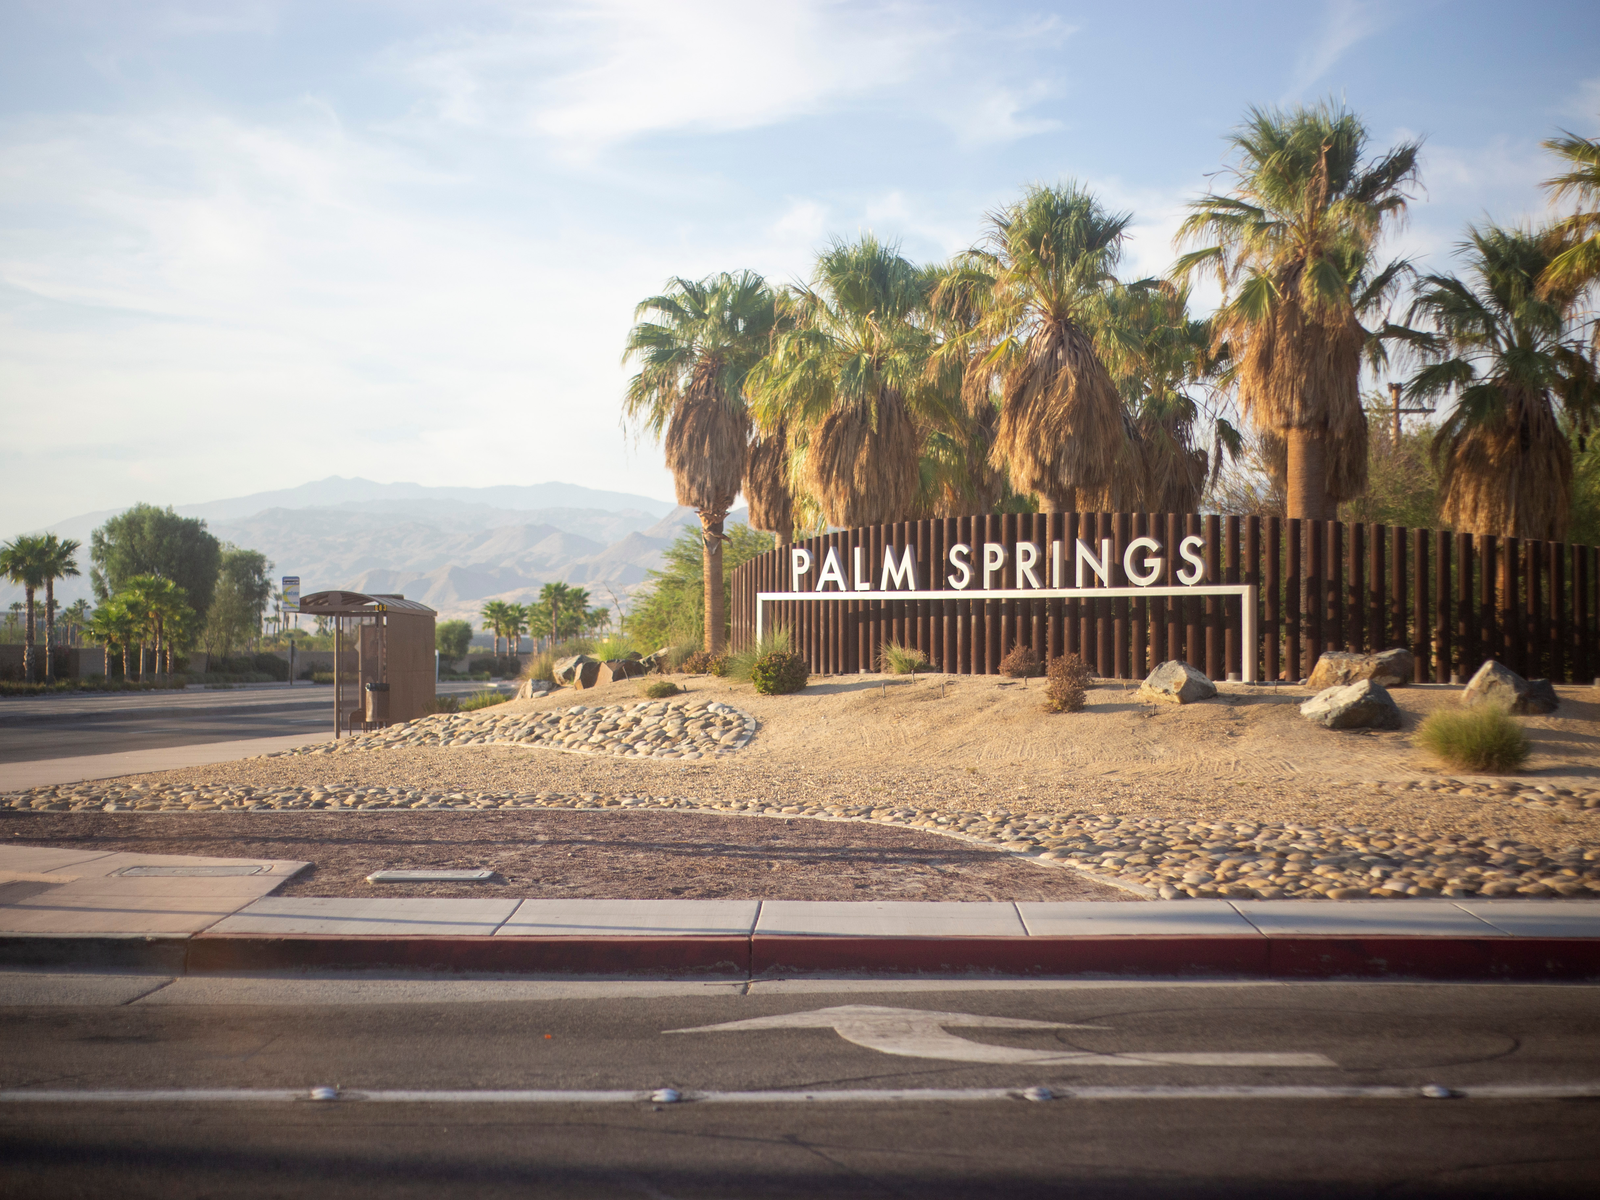 A bus stop near the huge signage of Palm Springs with palm trees in backdrop, one of the best things to do in Palm Springs